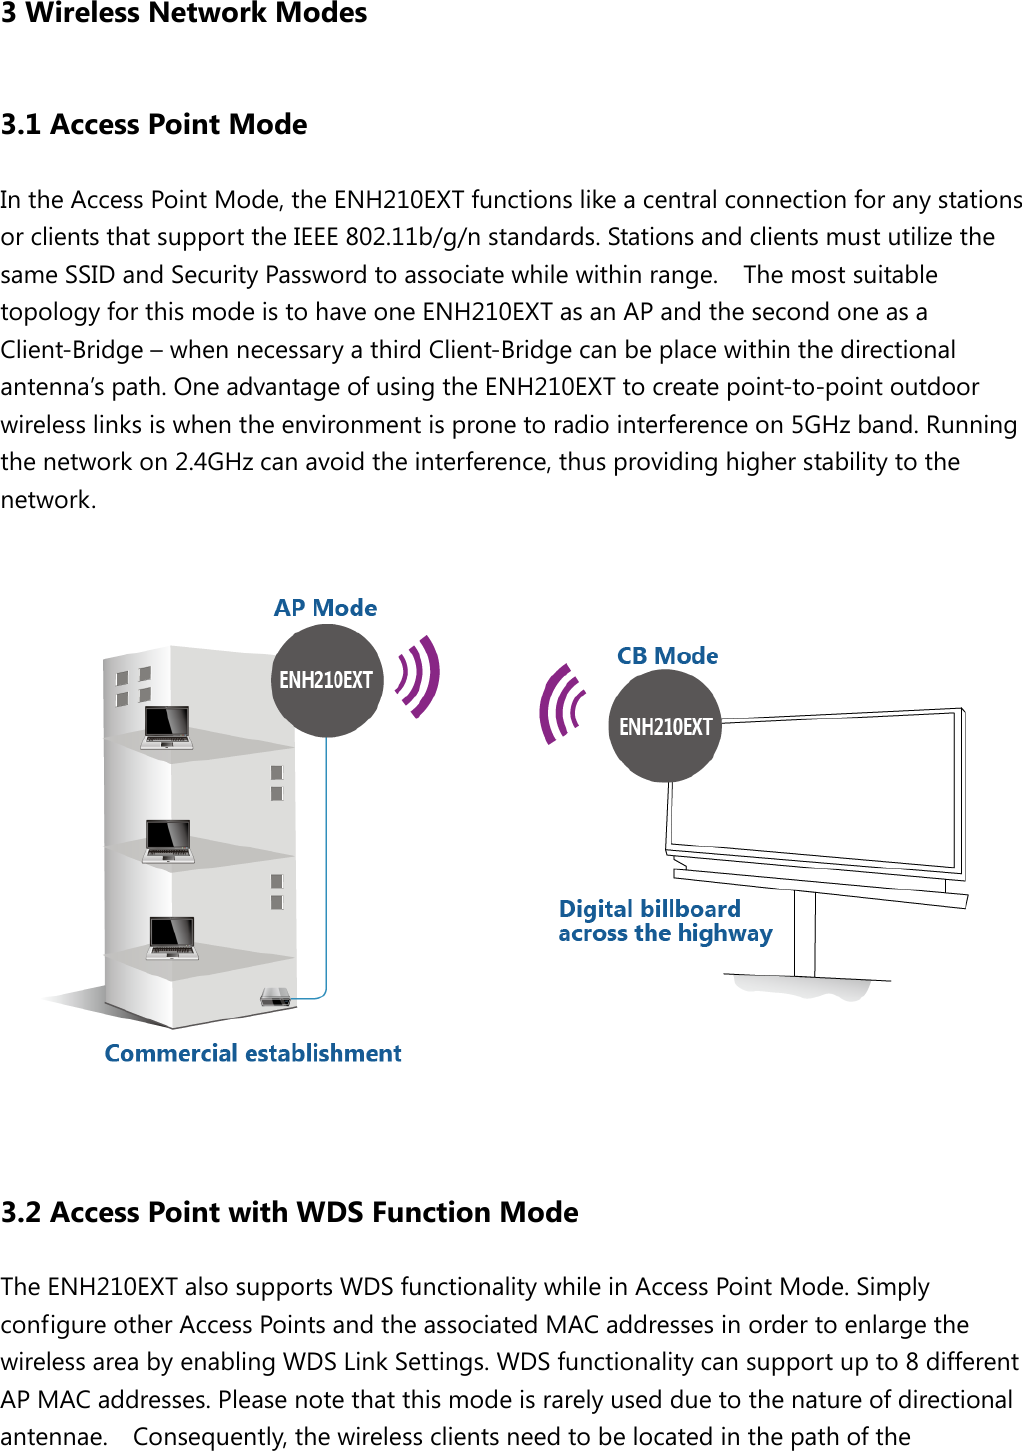  3 Wireless Network Modes 3.1 Access Point Mode In the Access Point Mode, the ENH210EXT functions like a central connection for any stations or clients that support the IEEE 802.11b/g/n standards. Stations and clients must utilize the same SSID and Security Password to associate while within range.  The most suitable topology for this mode is to have one ENH210EXT as an AP and the second one as a Client-Bridge – when necessary a third Client-Bridge can be place within the directional antenna’s path. One advantage of using the ENH210EXT to create point-to-point outdoor wireless links is when the environment is prone to radio interference on 5GHz band. Running the network on 2.4GHz can avoid the interference, thus providing higher stability to the network.    3.2 Access Point with WDS Function Mode The ENH210EXT also supports WDS functionality while in Access Point Mode. Simply configure other Access Points and the associated MAC addresses in order to enlarge the wireless area by enabling WDS Link Settings. WDS functionality can support up to 8 different AP MAC addresses. Please note that this mode is rarely used due to the nature of directional antennae.   Consequently, the wireless clients need to be located in the path of the 